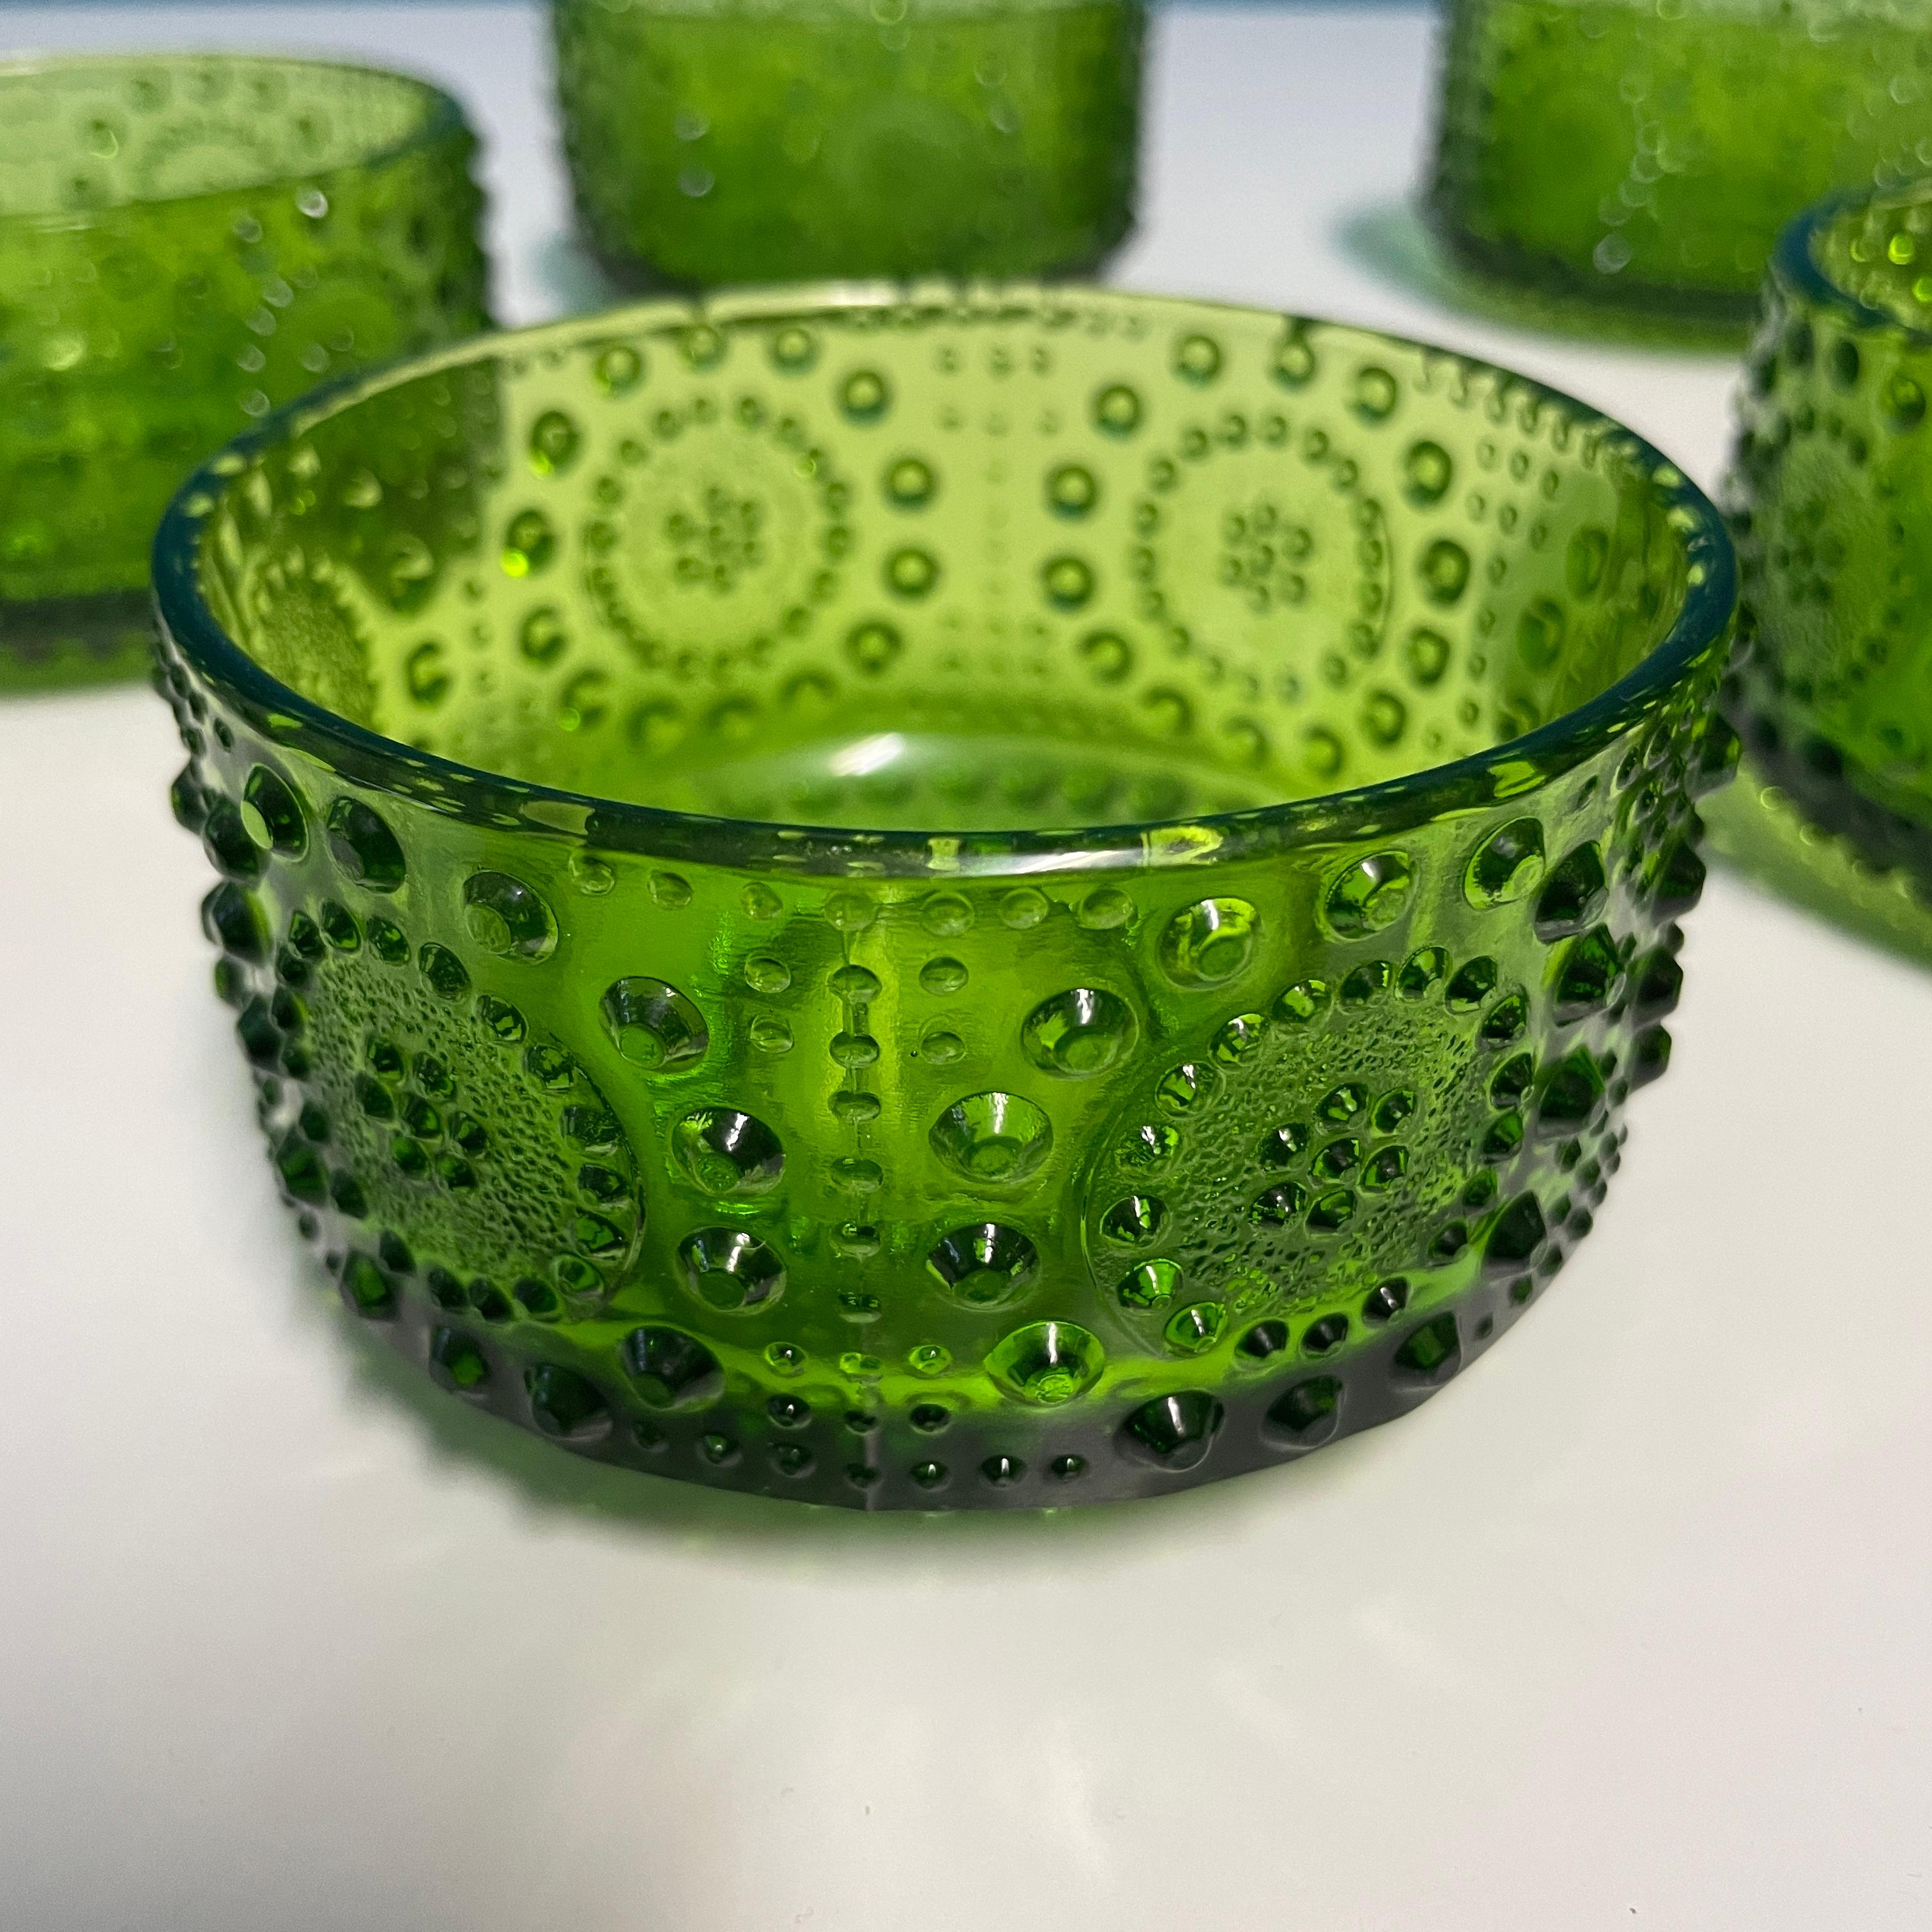 The Grapponia dessert bowl made by Riihimäki Glassworks is part of the Grapponia series designed by Nanny Still in the late 1960s.
These green bowls are decorated with a beautiful hobnail pattern and they are perfect for adding a touch of charm to